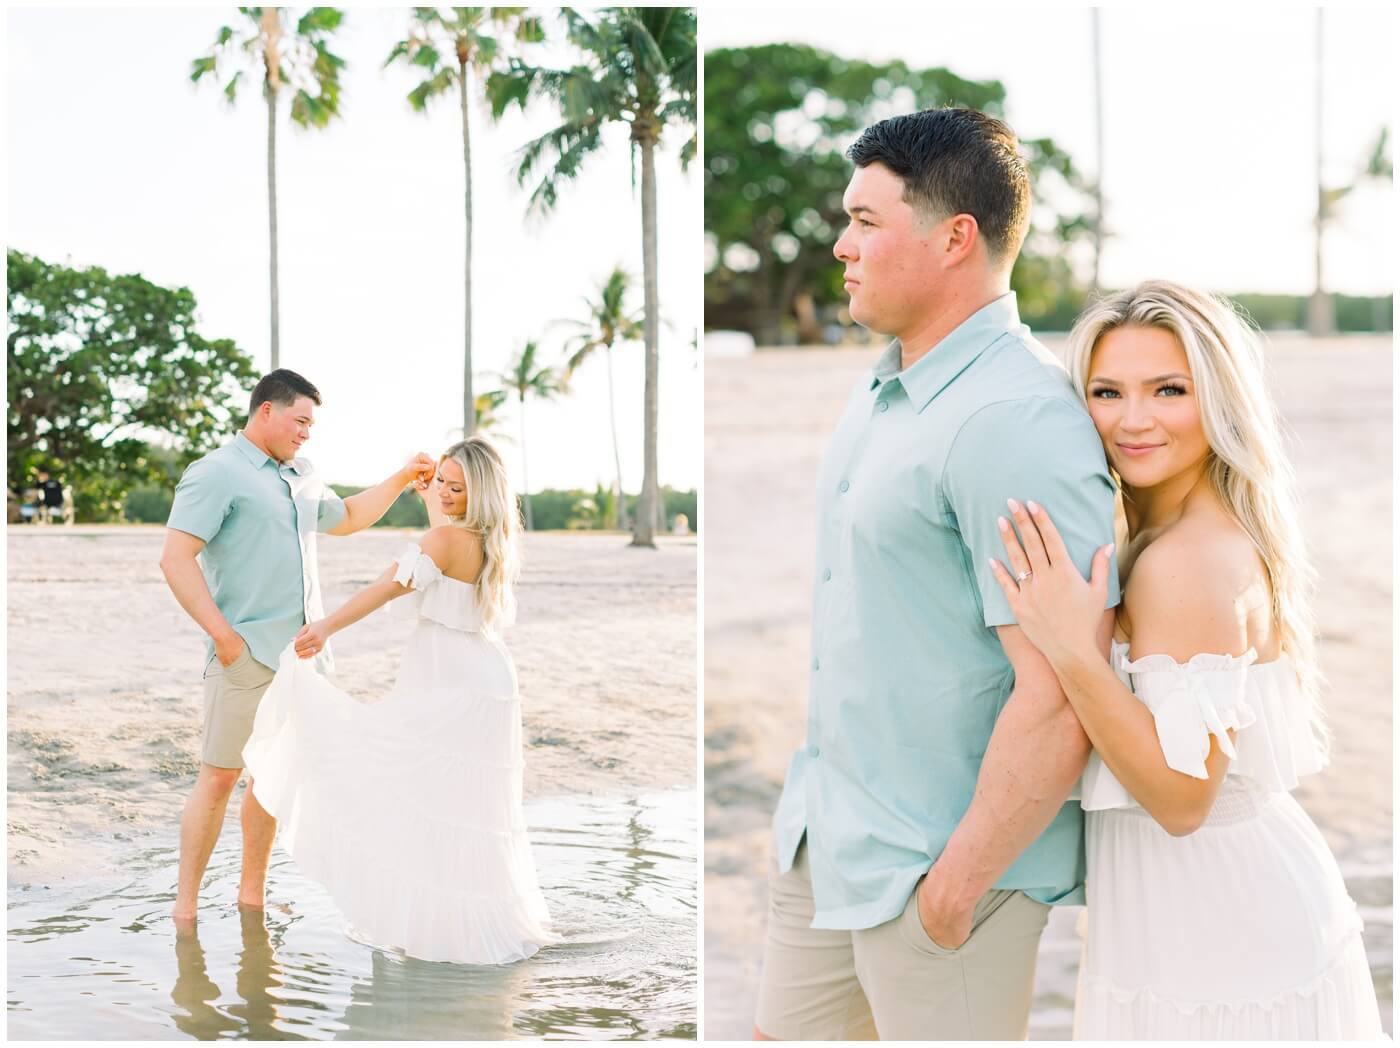 Wedding photographer in Miami | Couple smiles together on the beach